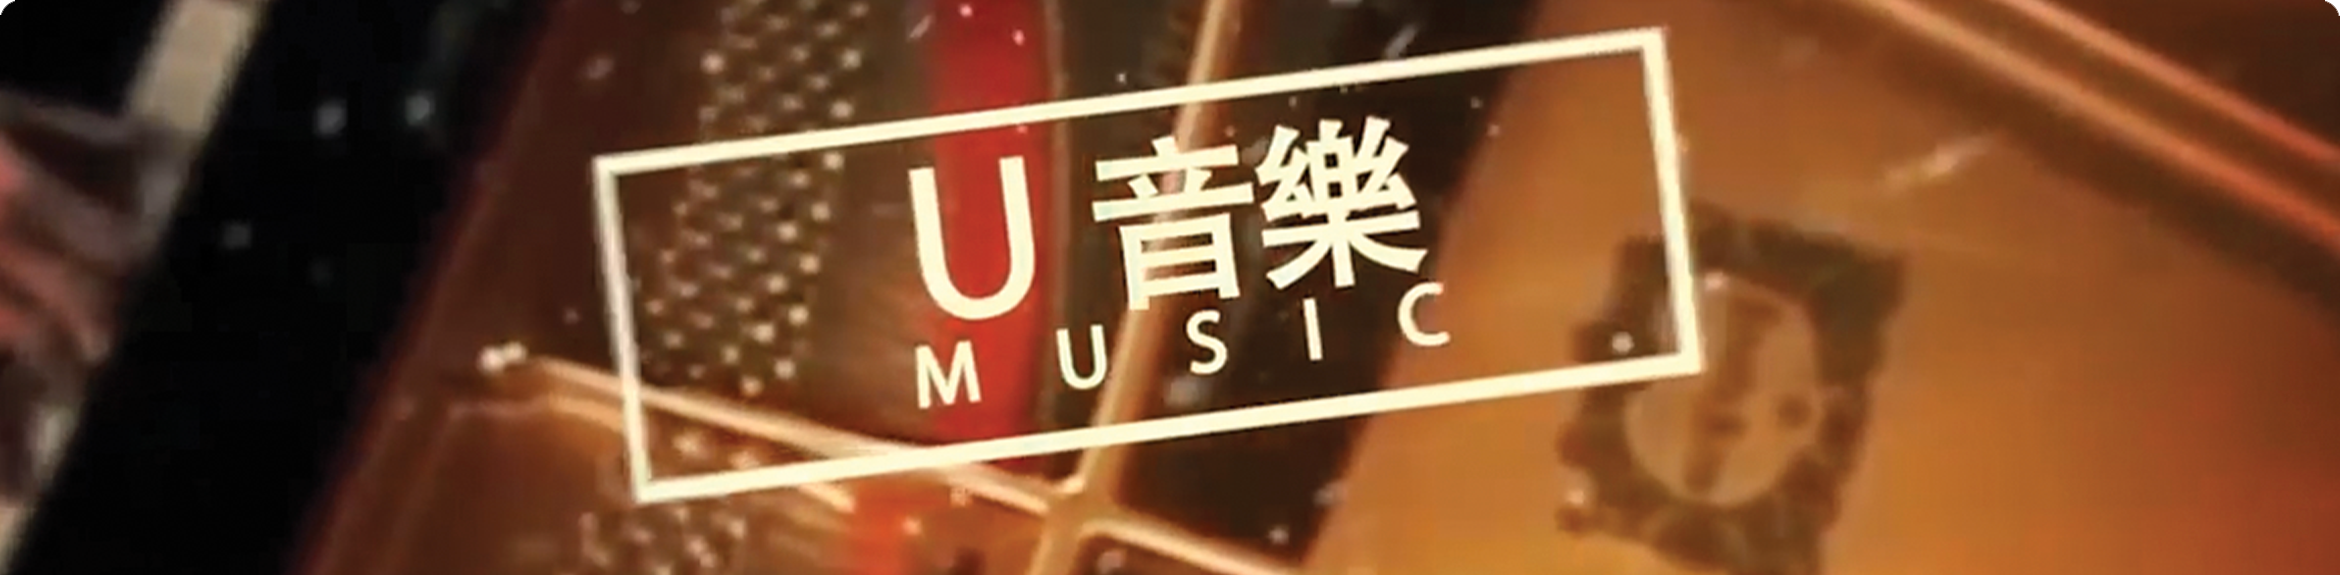 Picture of Umusic Banner